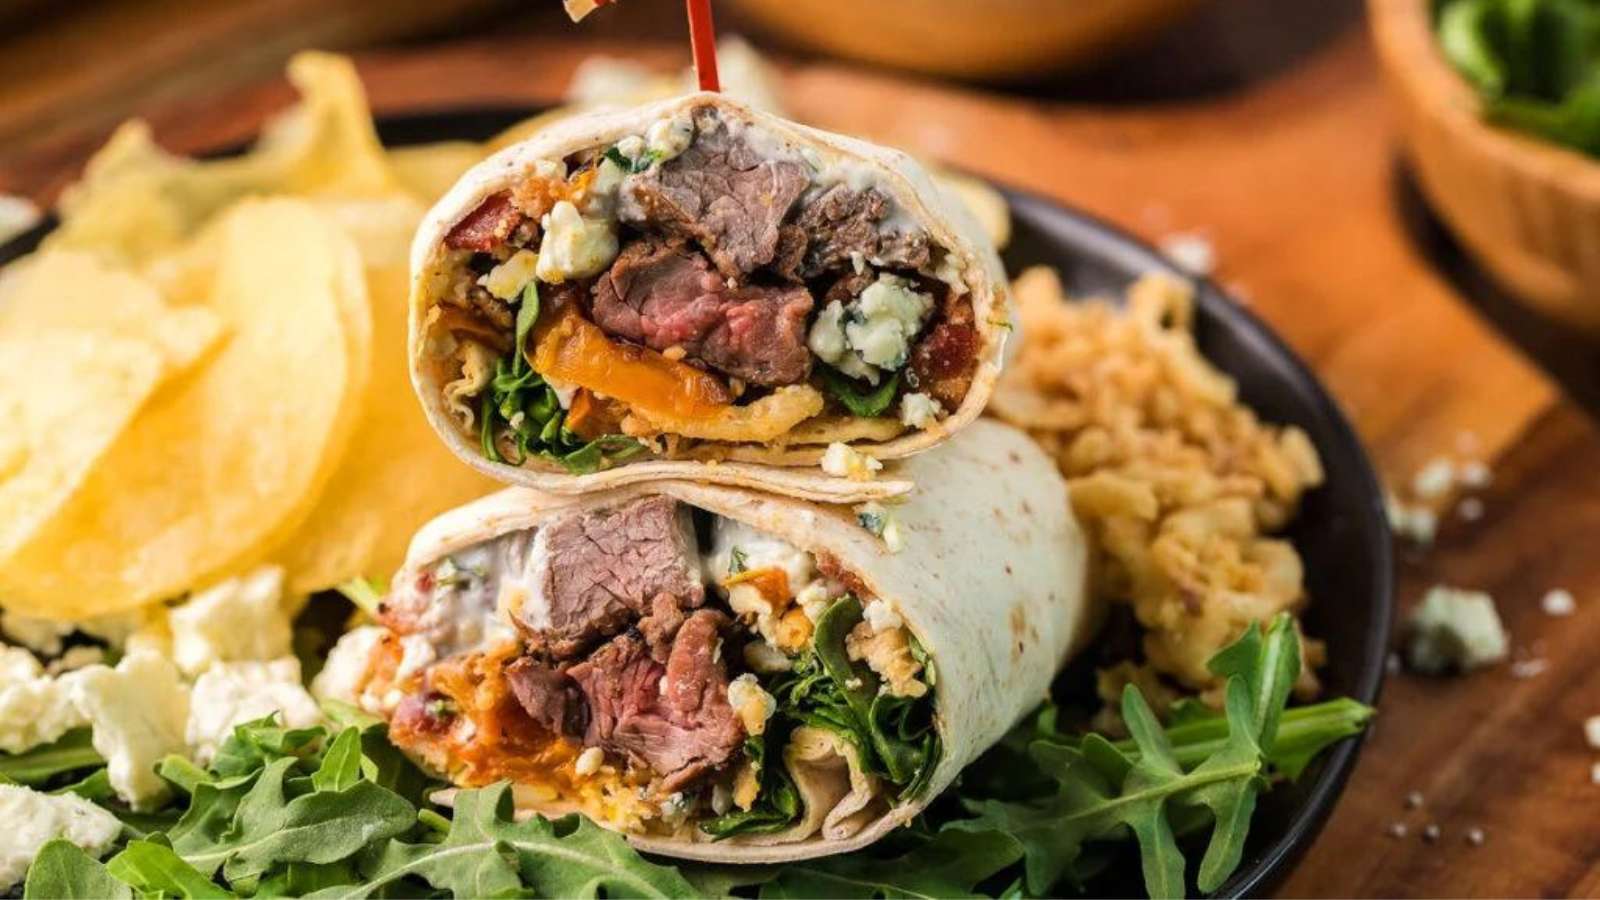 A wrap with meat and vegetables on a plate.